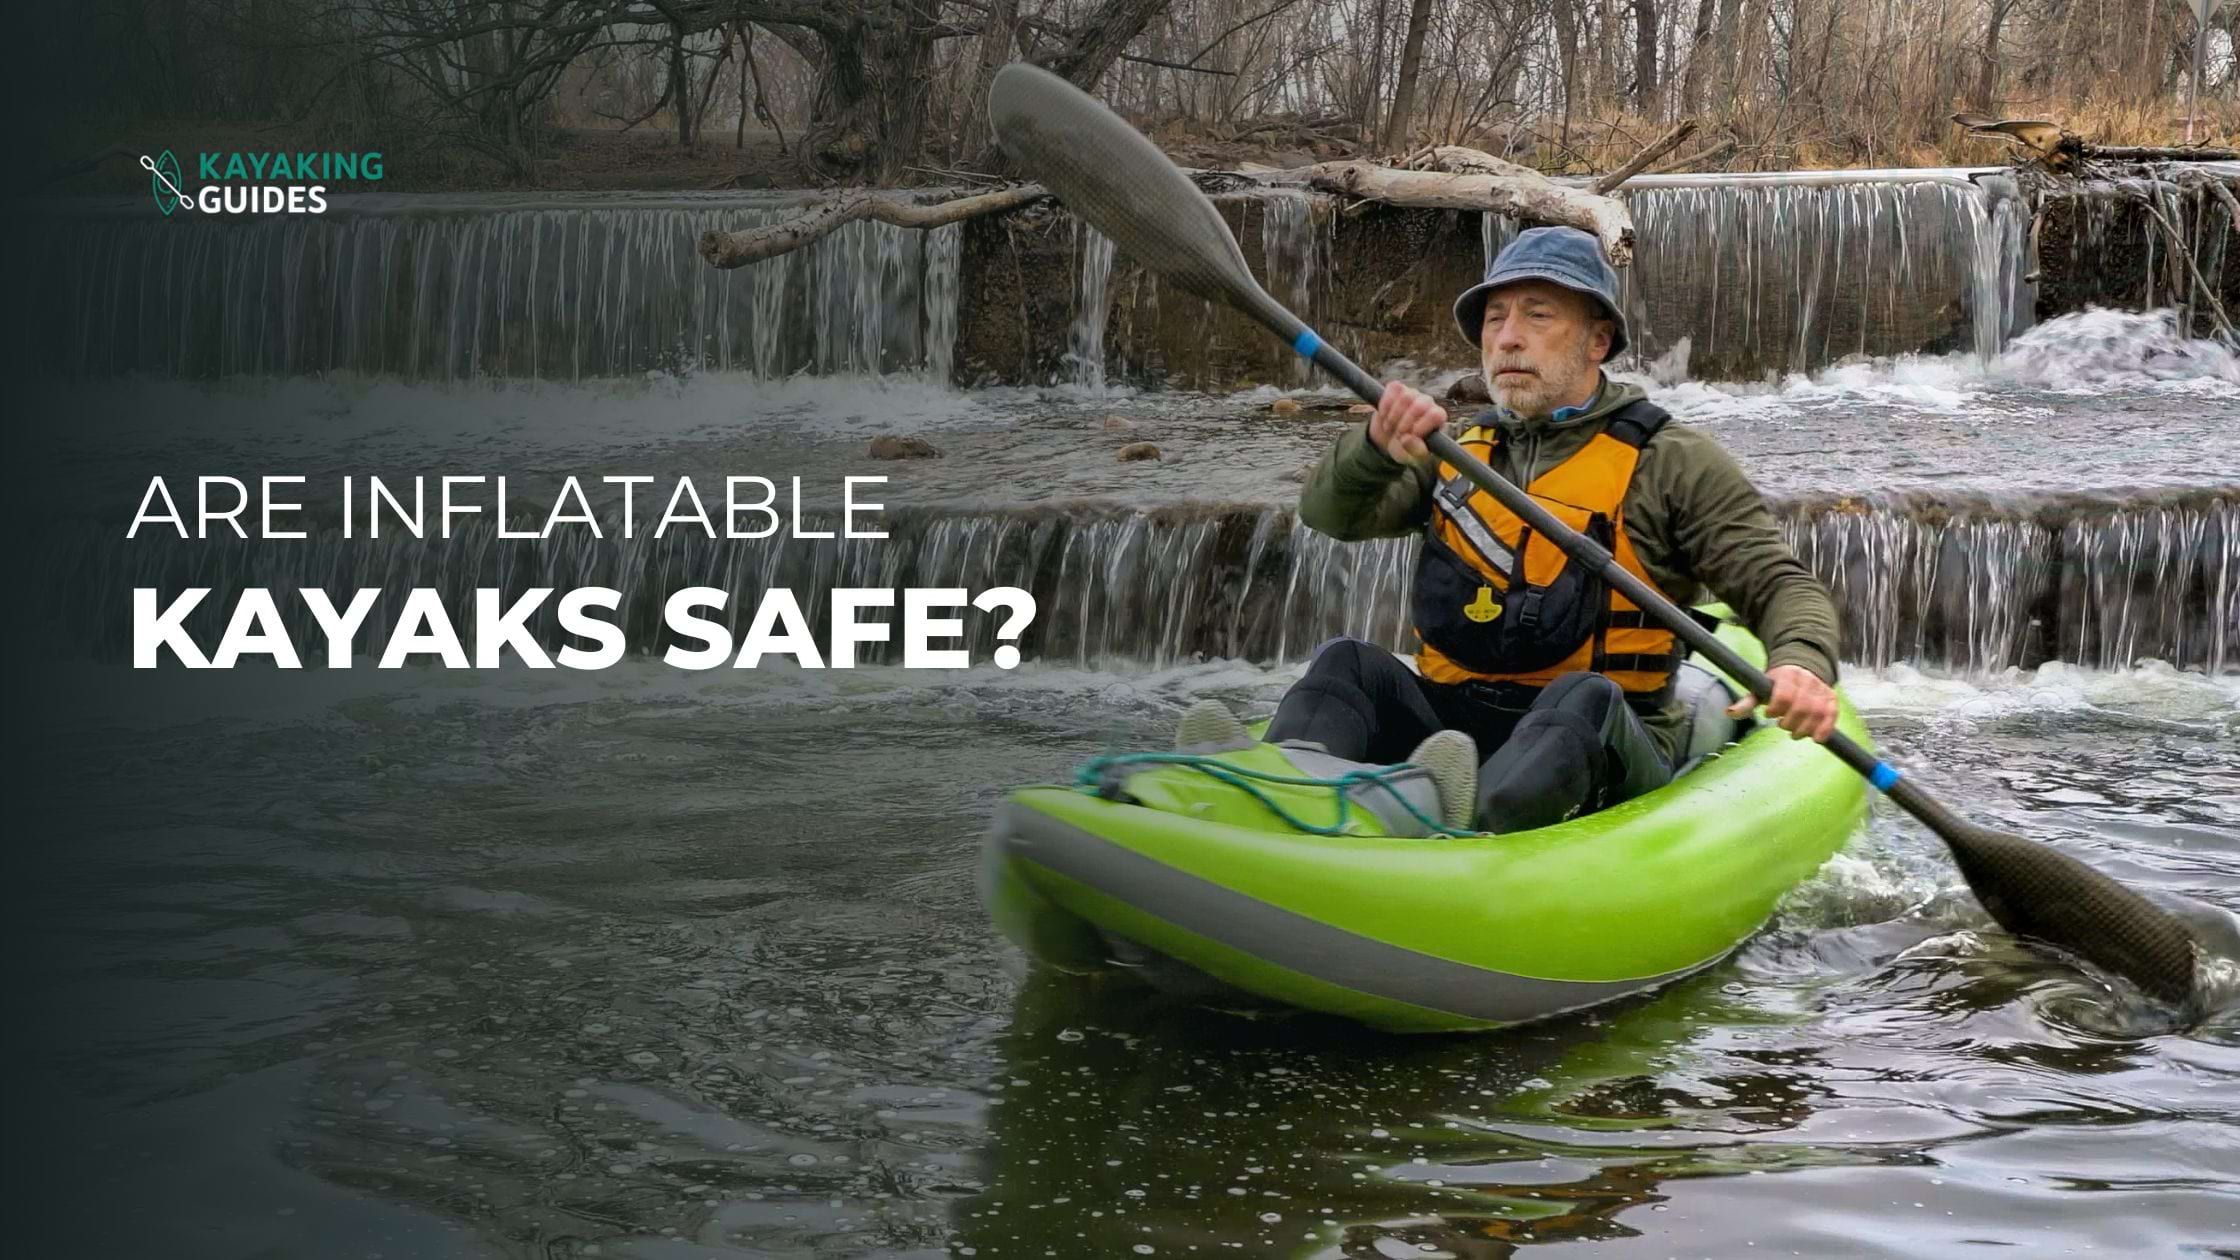 Are inflatable kayaks safe